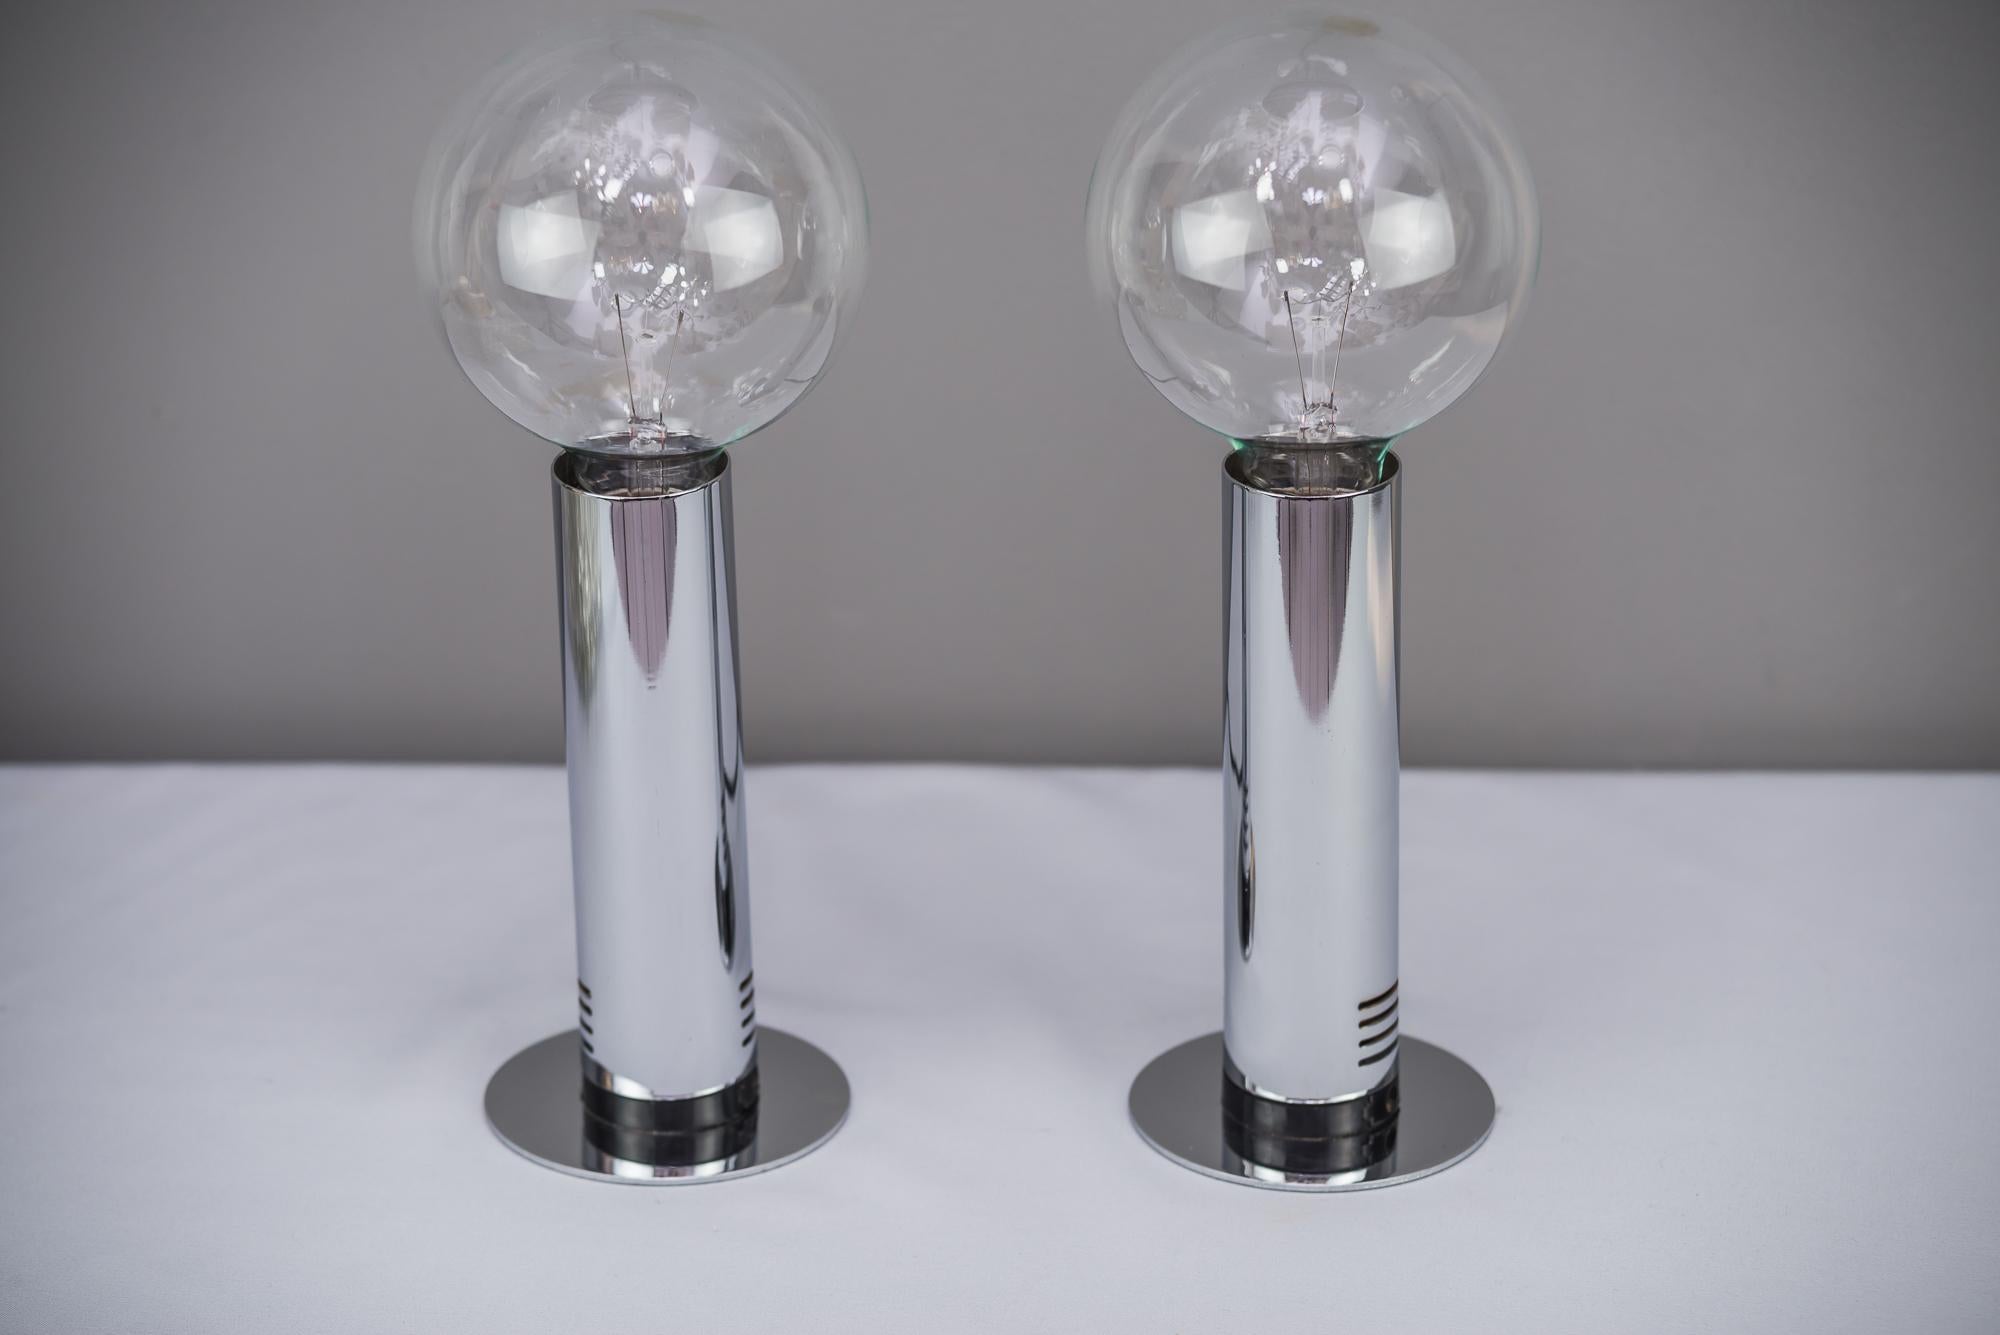 Two chrome table lamps Italy, circa 1970s
Original condition.